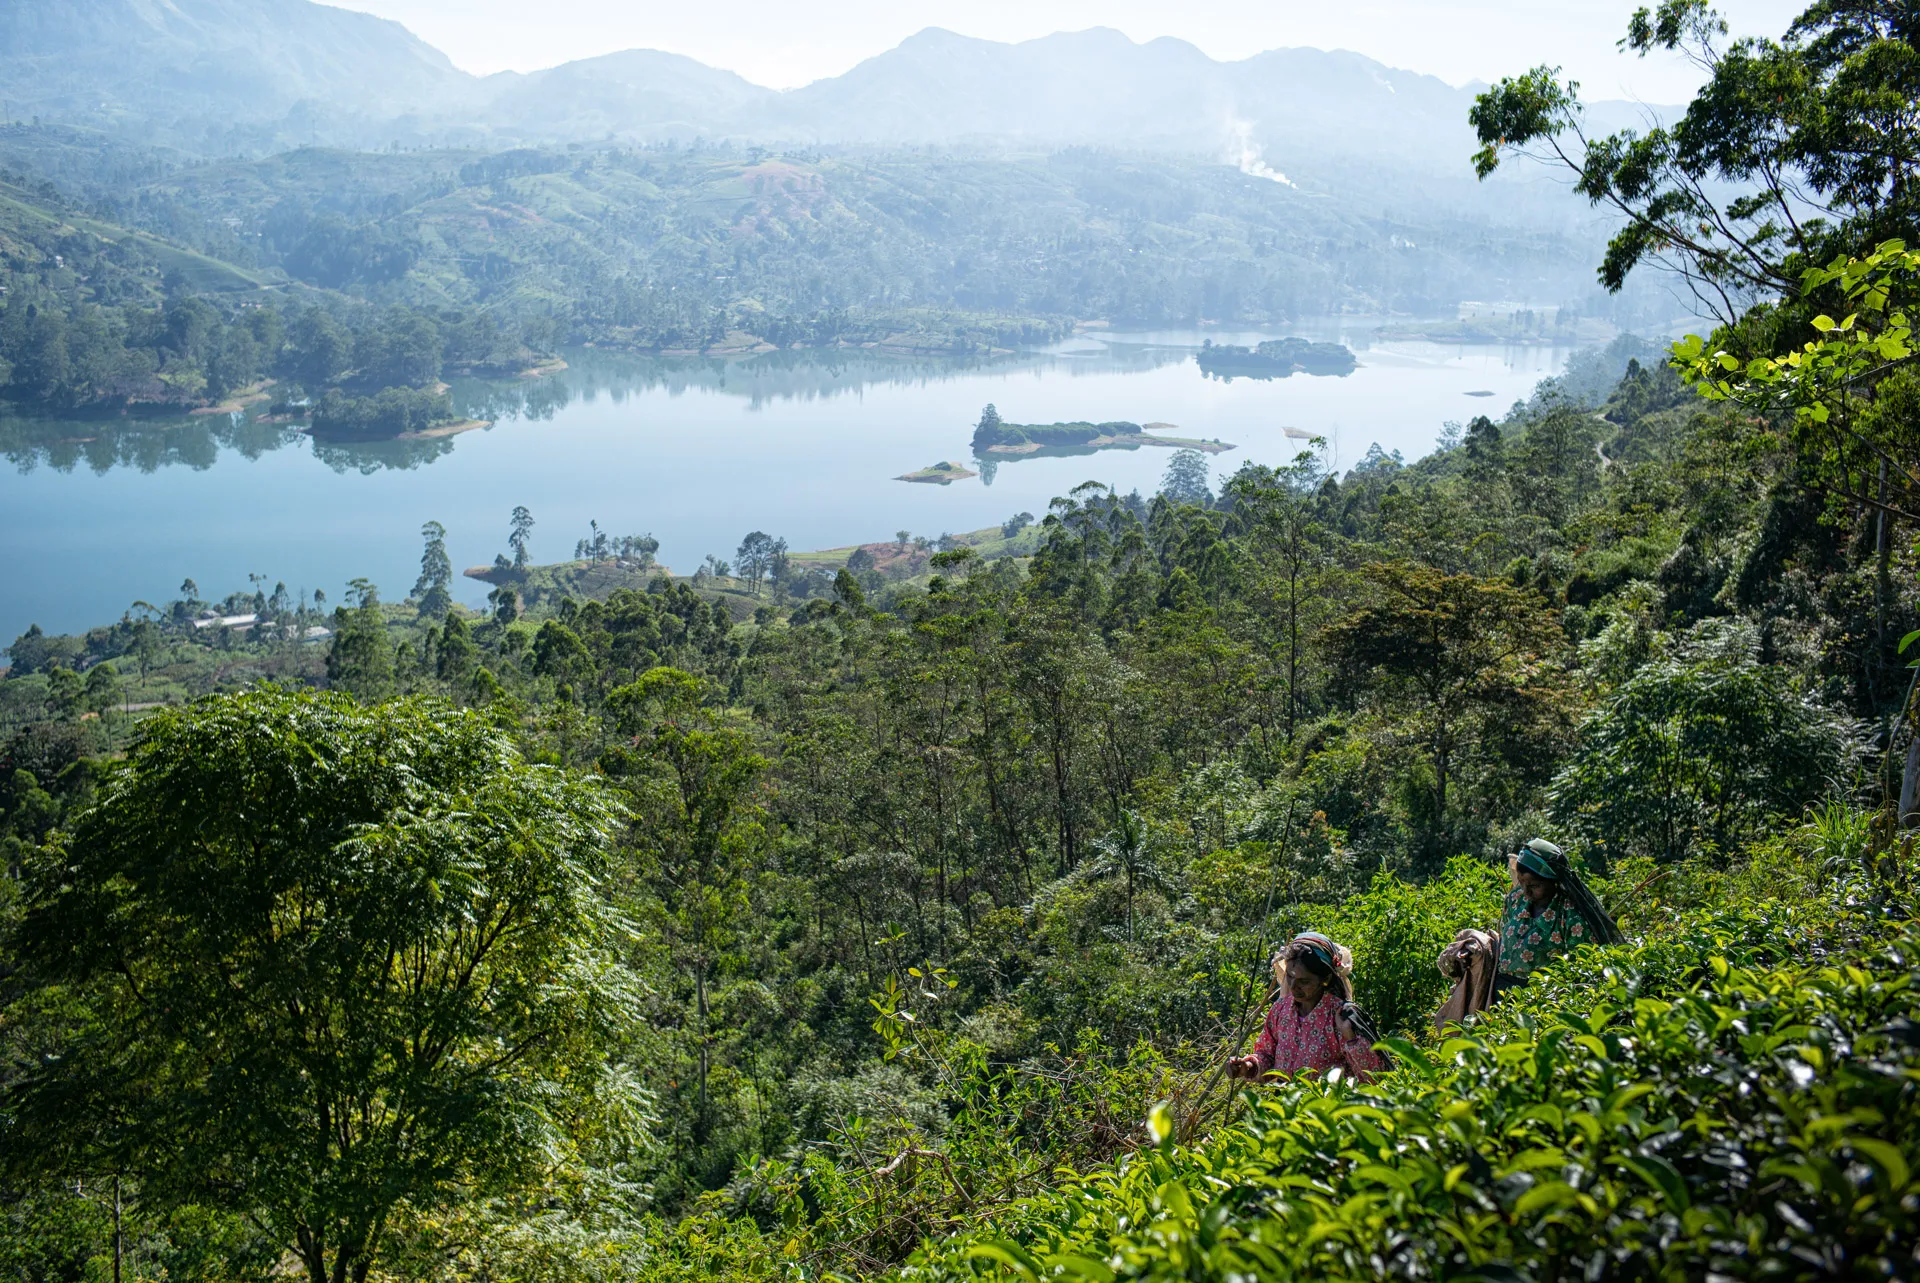 view of Dunkeld's tea garden and lake, with two tea-pickers working